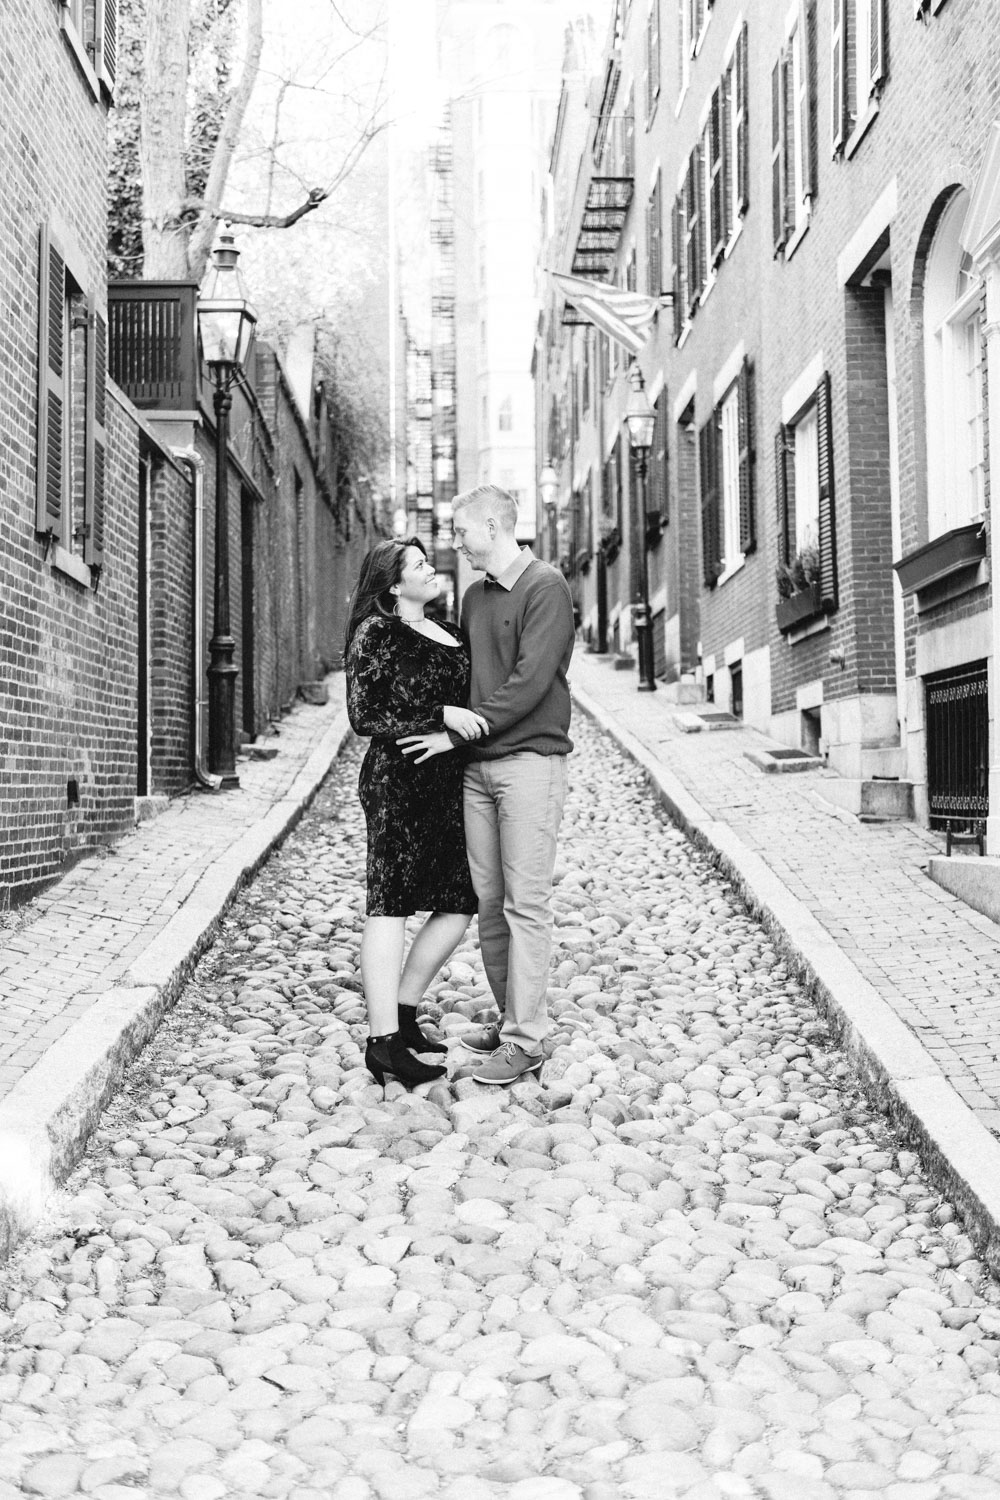 Andrea + Scott | Dog Lovers Beacon Hill Formal Spring Sunrise Creative Organic Romantic Black and White Engagement Session | Boston and New England Engagement Photography | Lorna Stell Photo